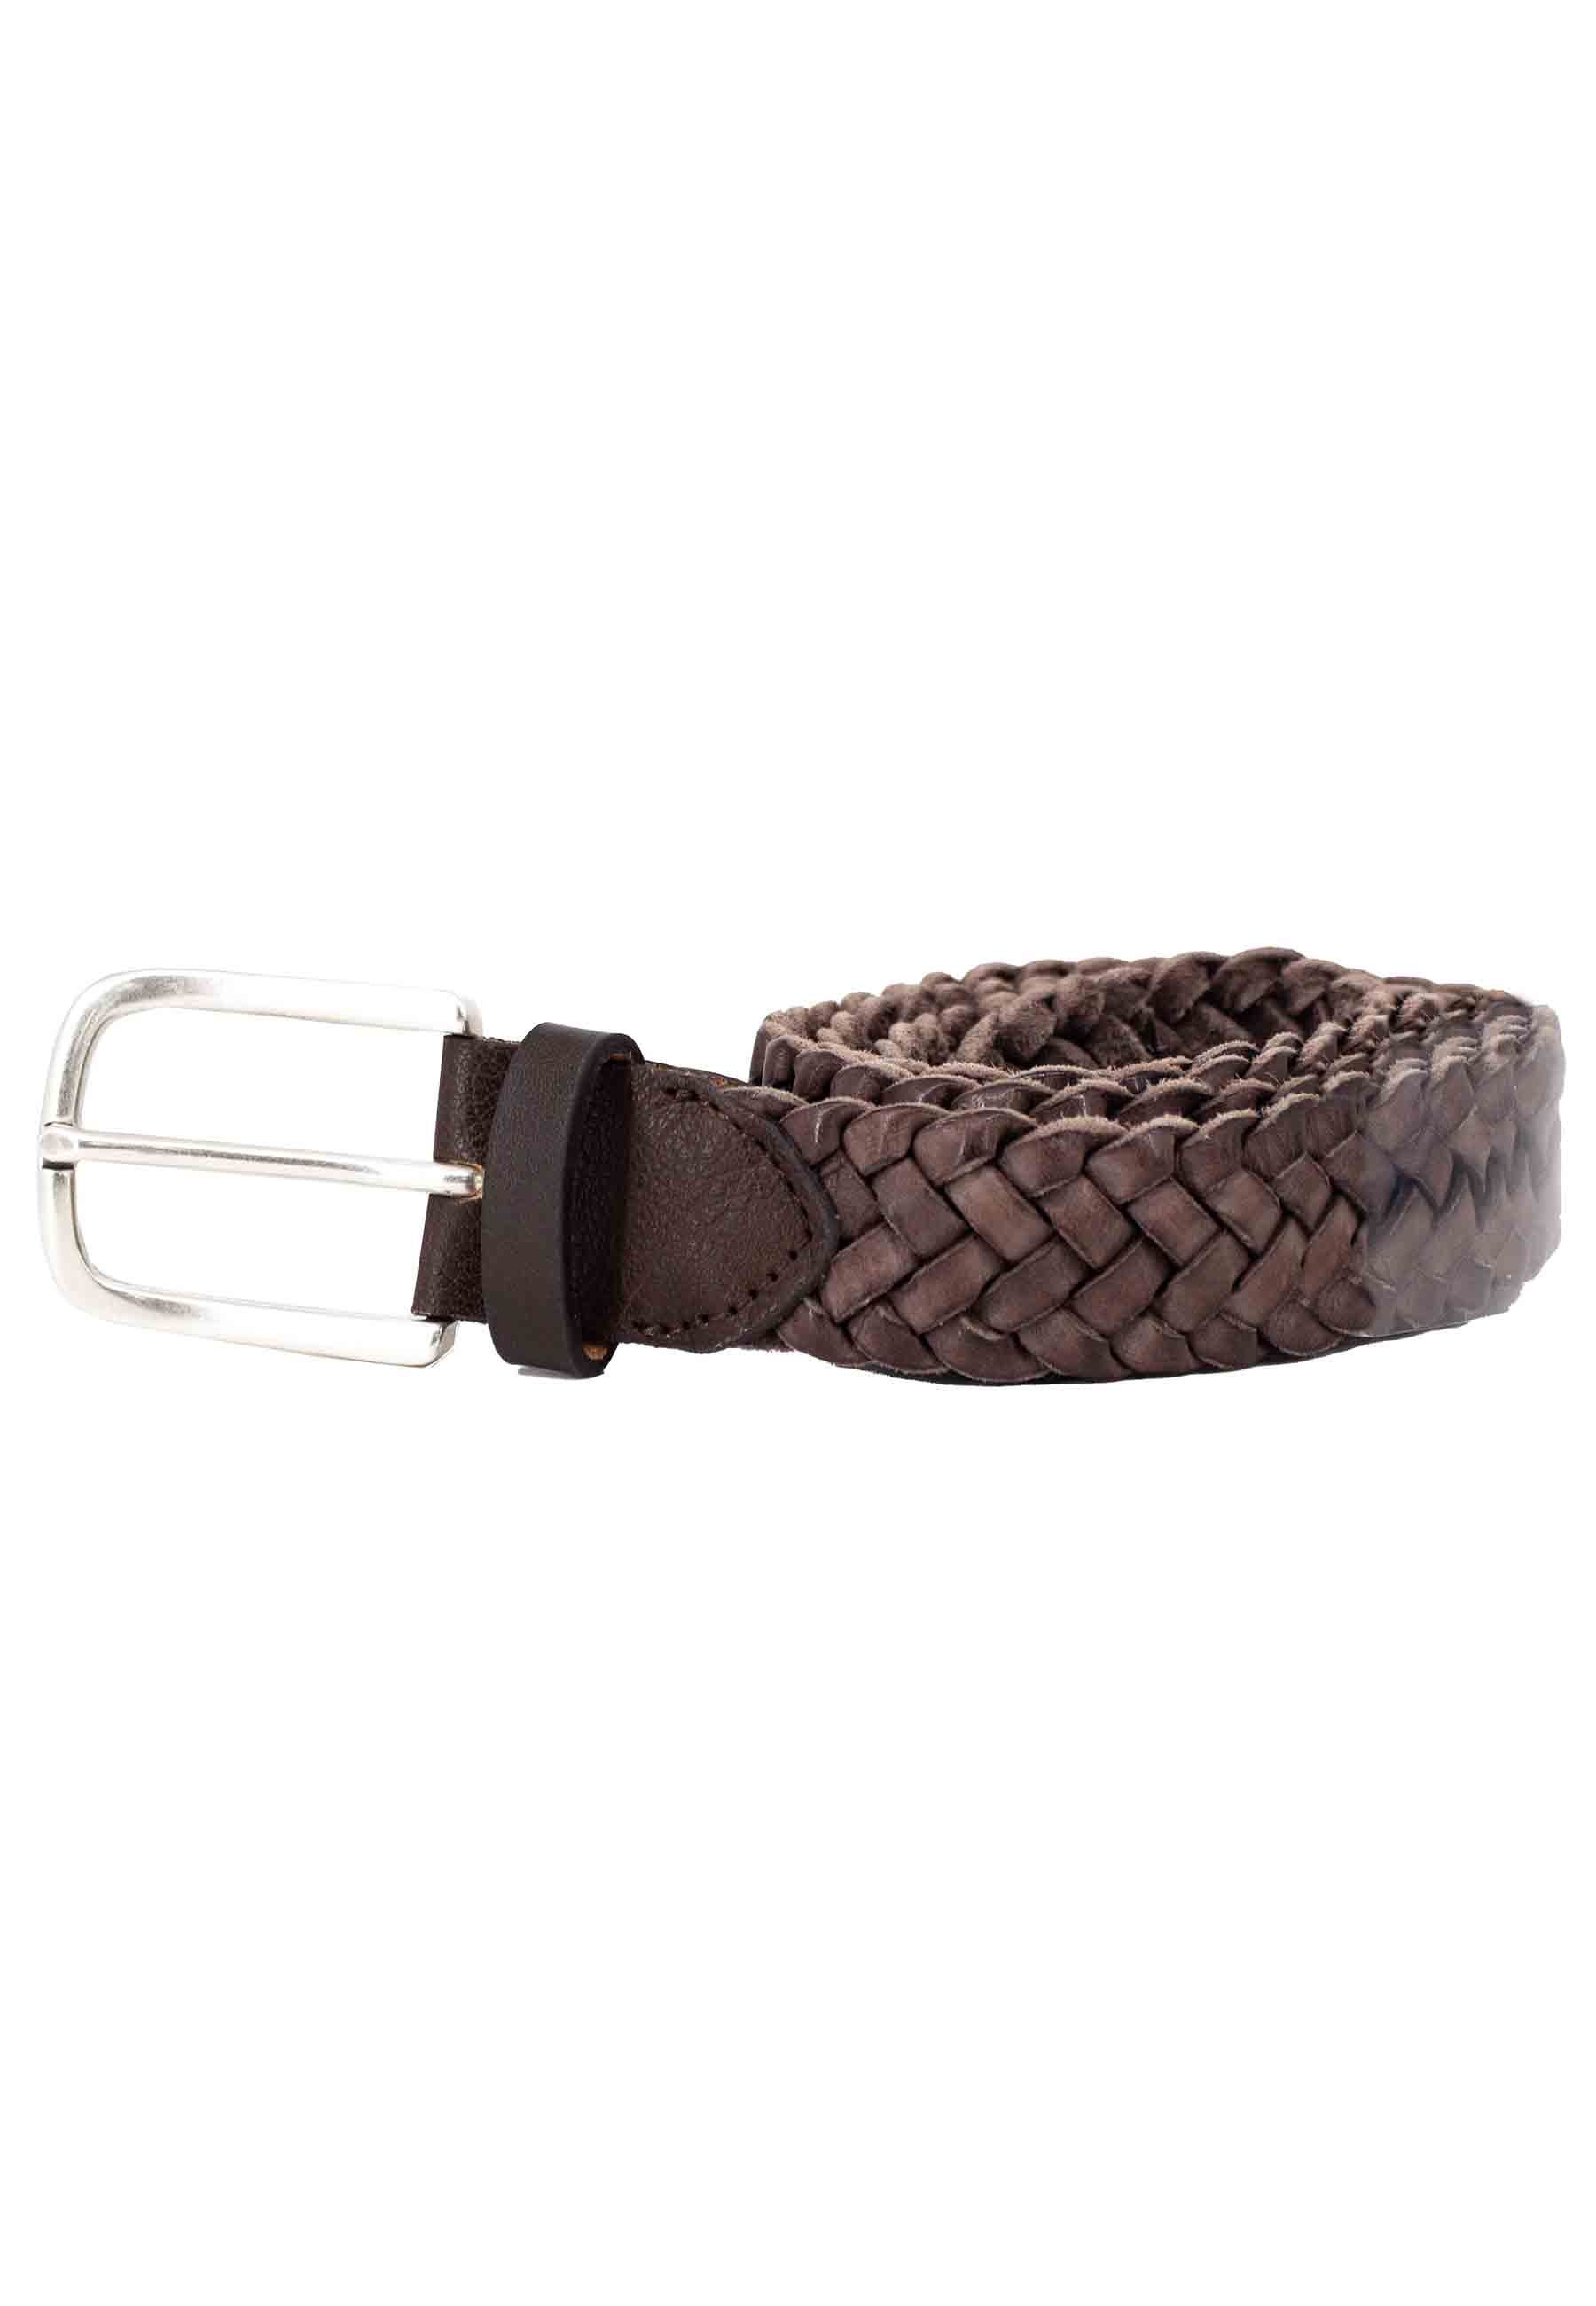 Men's belt in dark brown woven leather with silver buckle